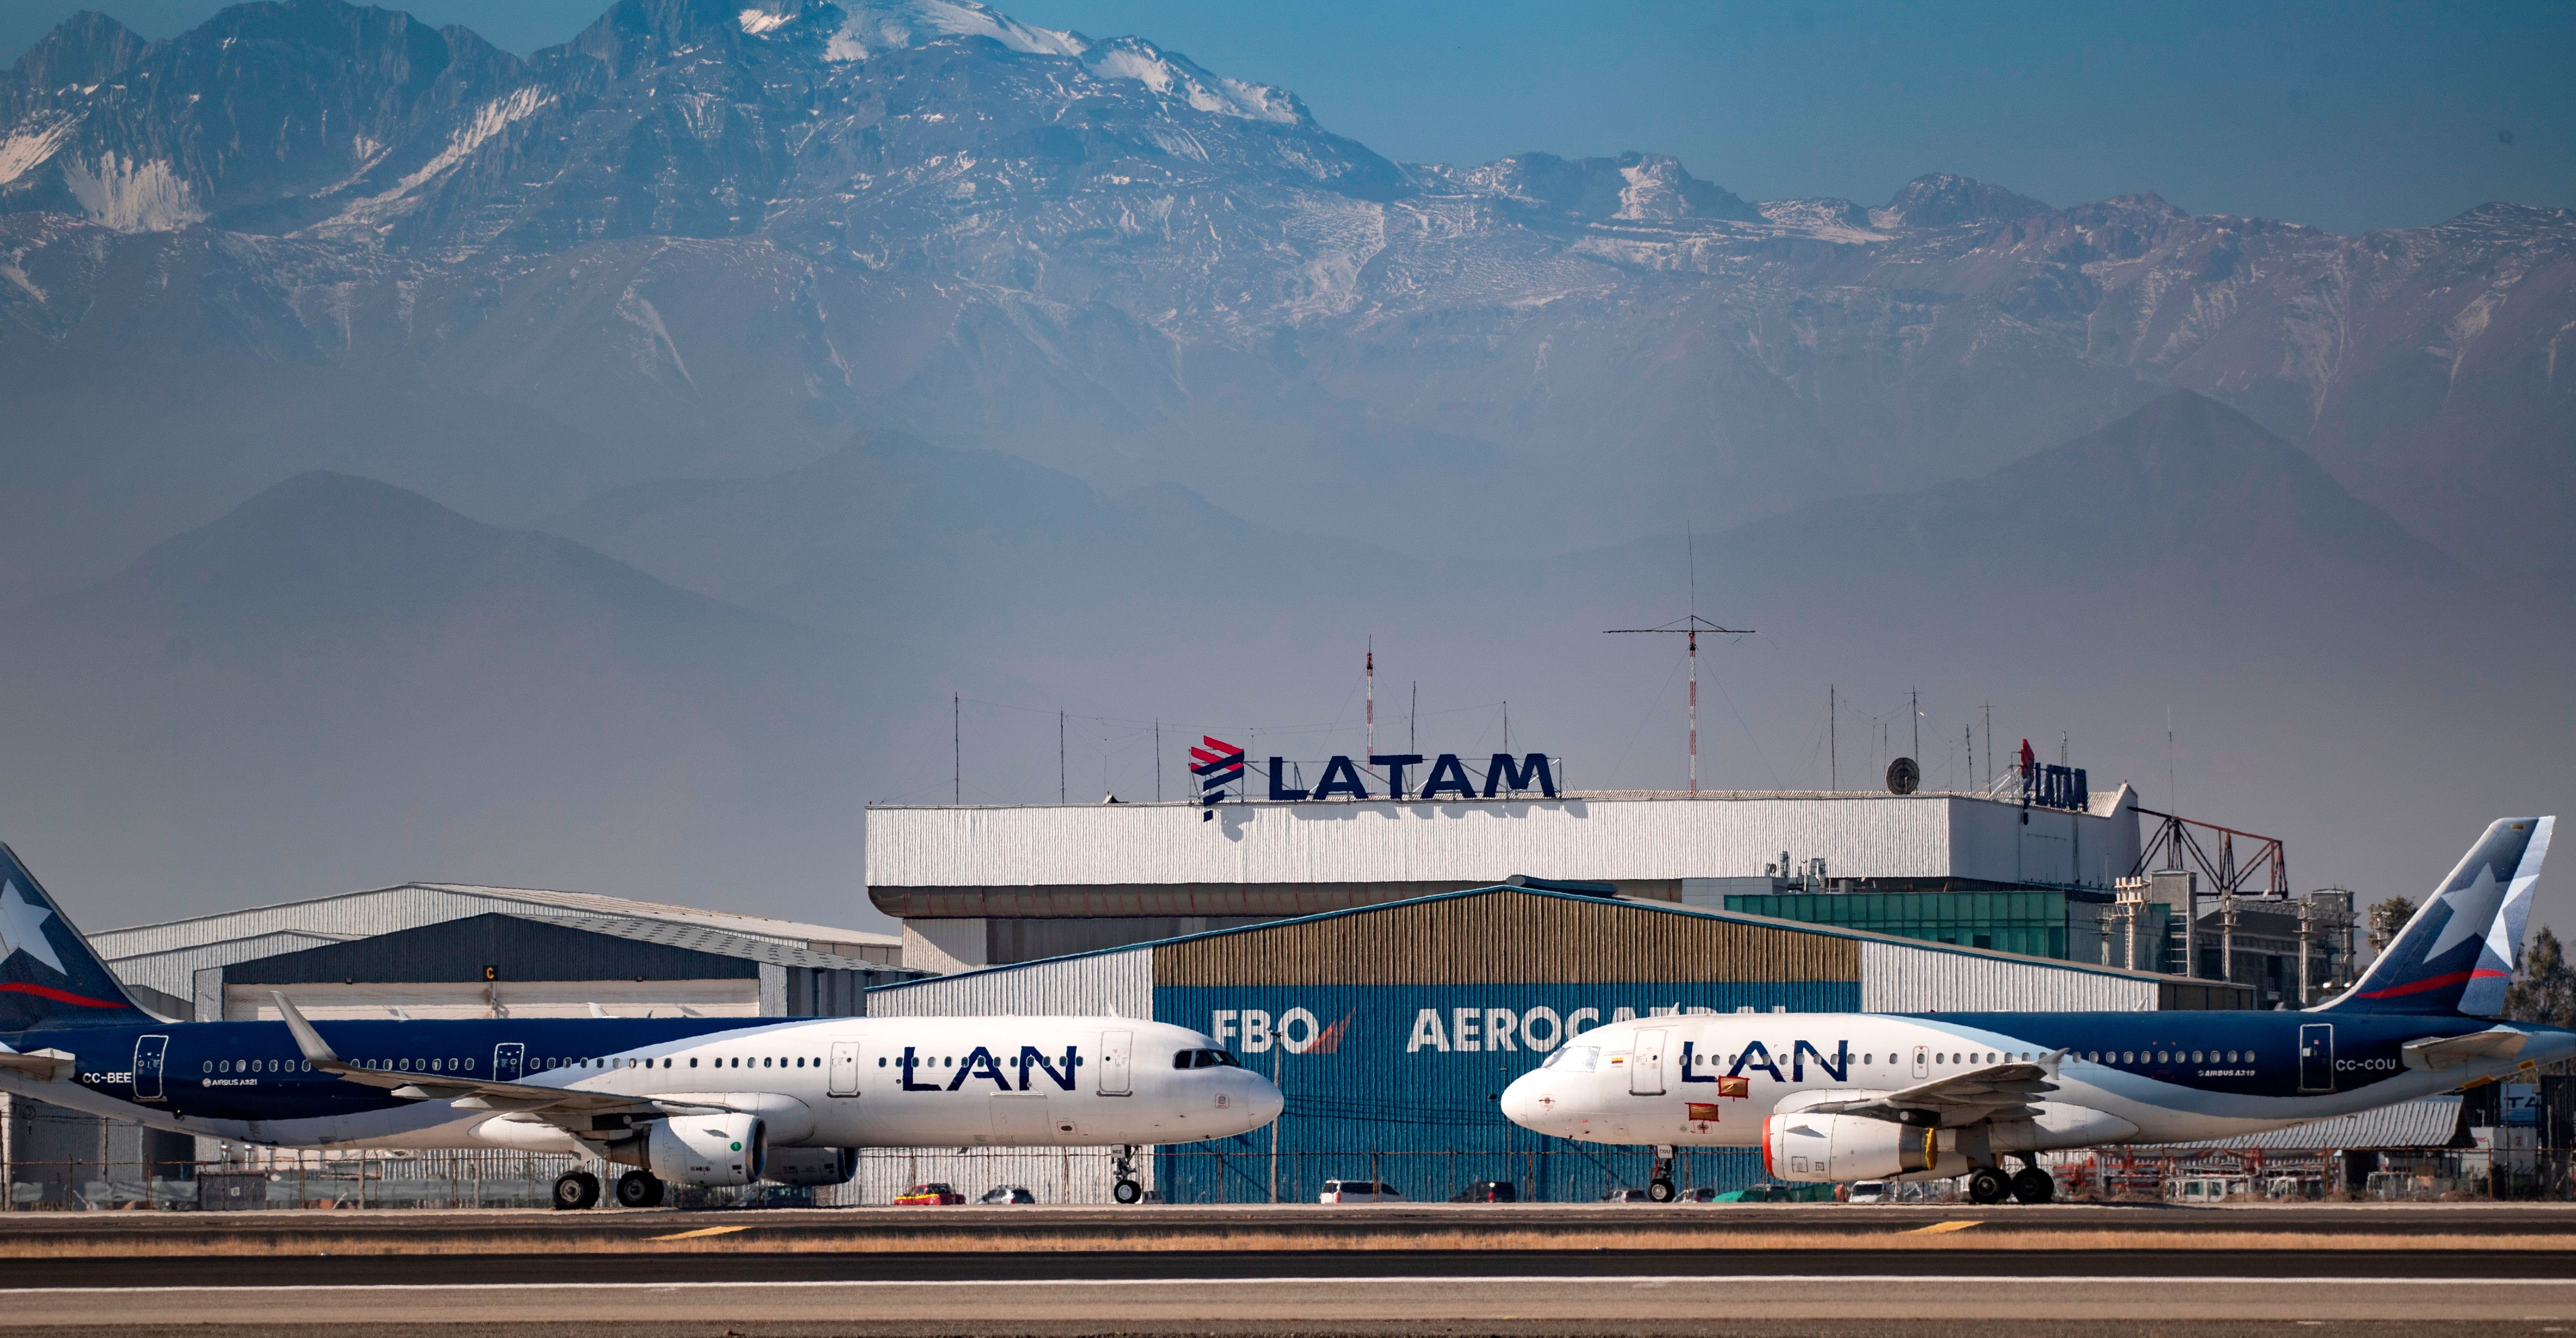 Two LATAM aircraft in front of a LATAM hangar.